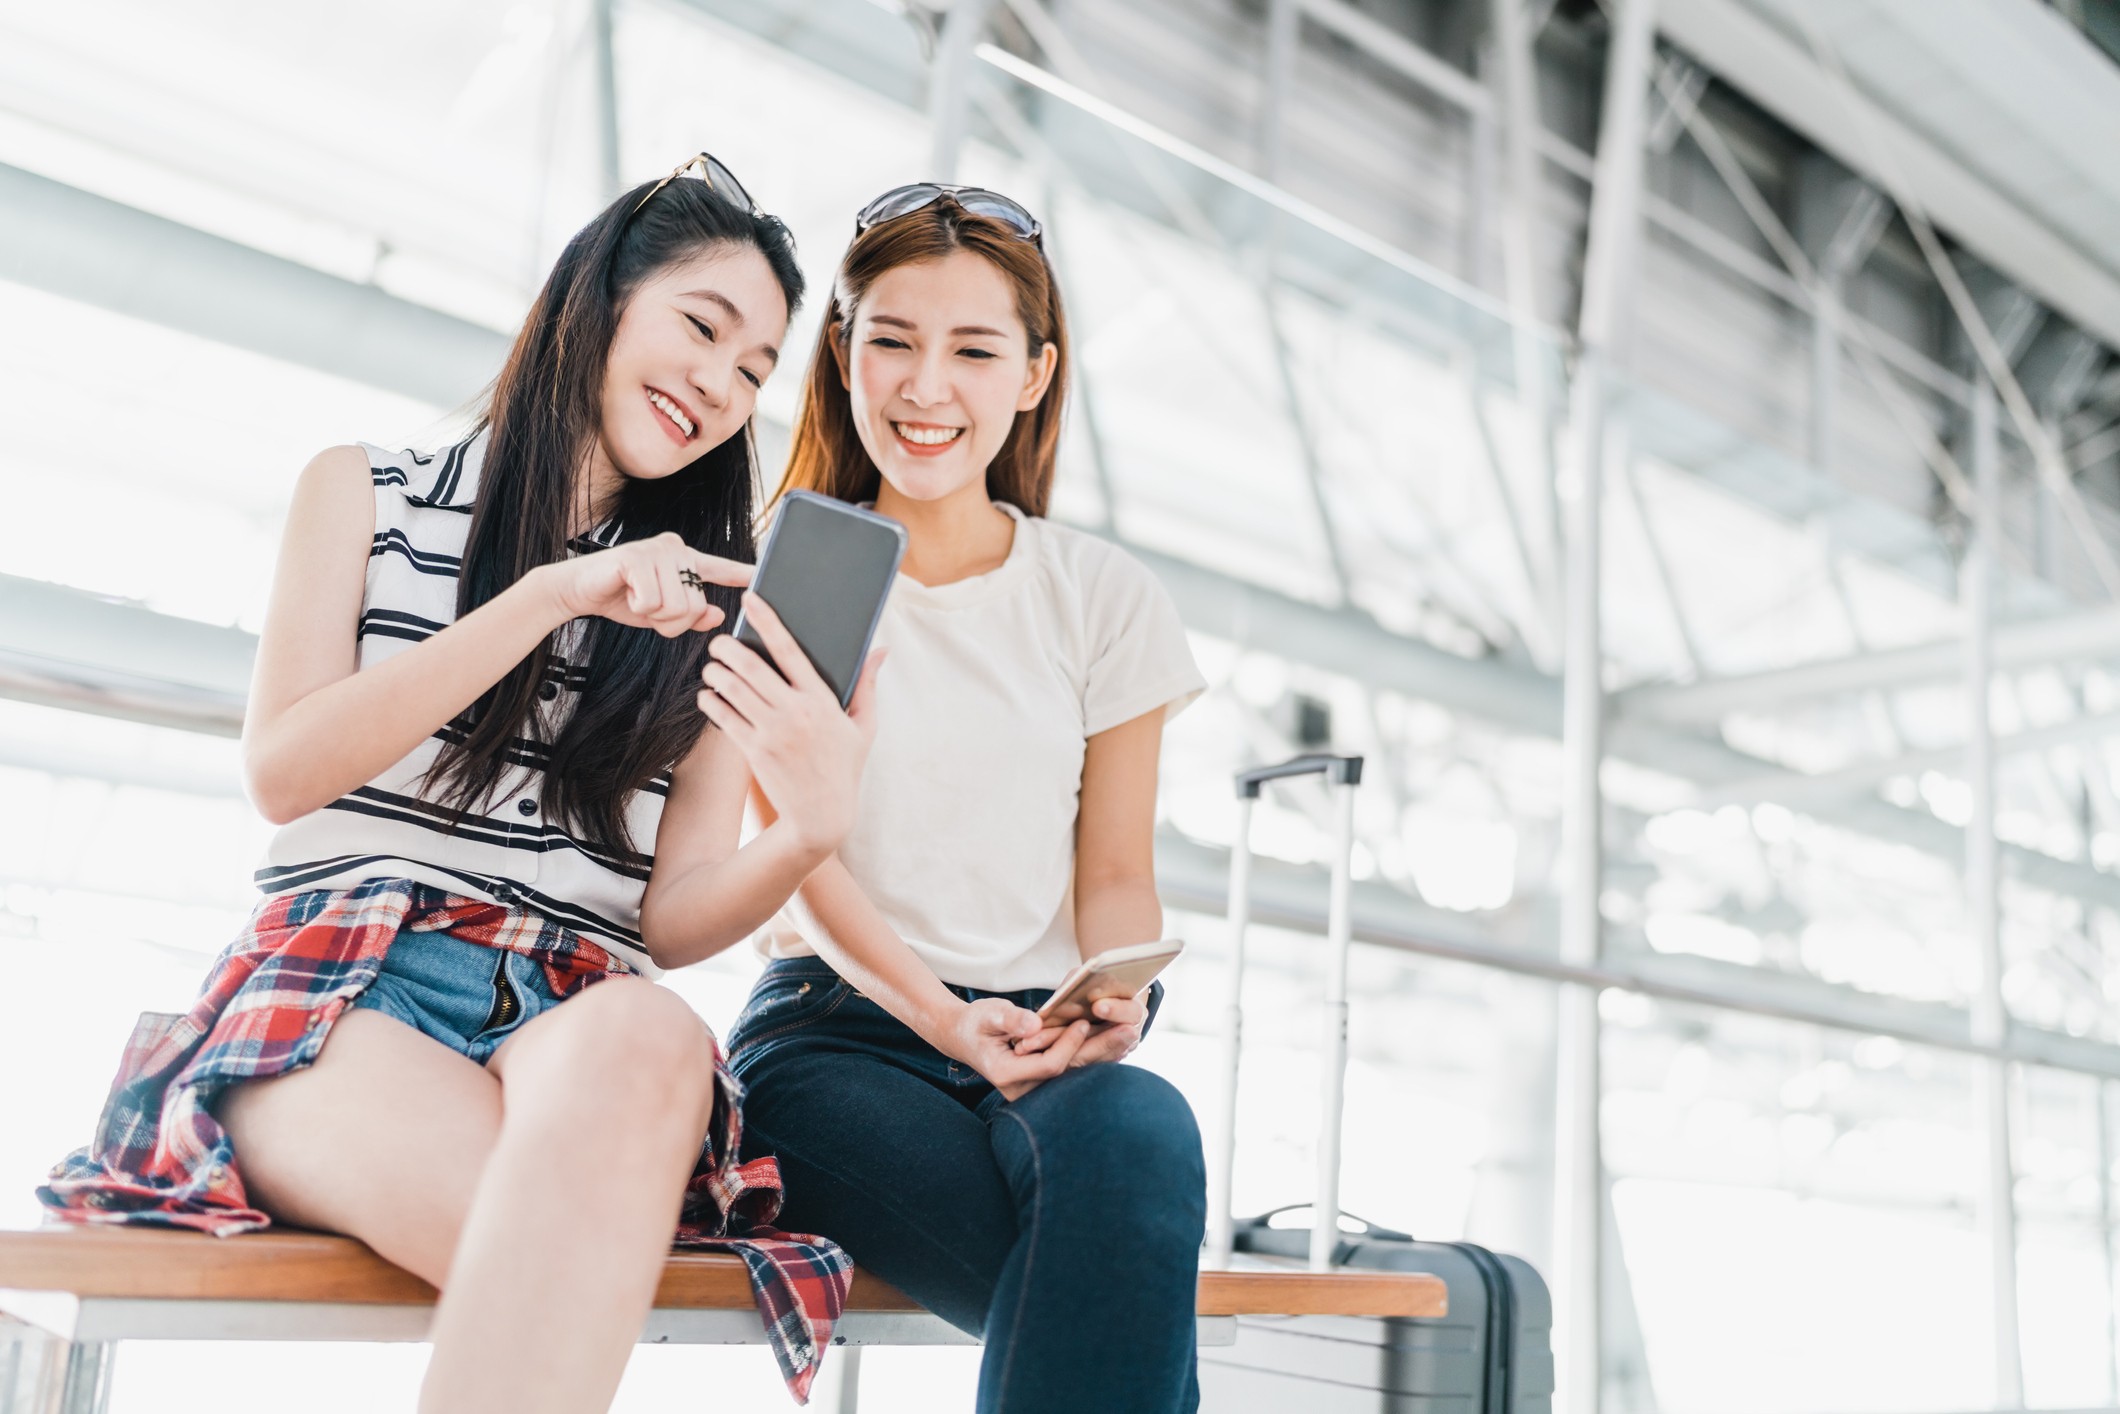 Travelling in China just got easier. Download some helpful apps onto your phone and start exploring. Photo: Getty Images/iStockphoto